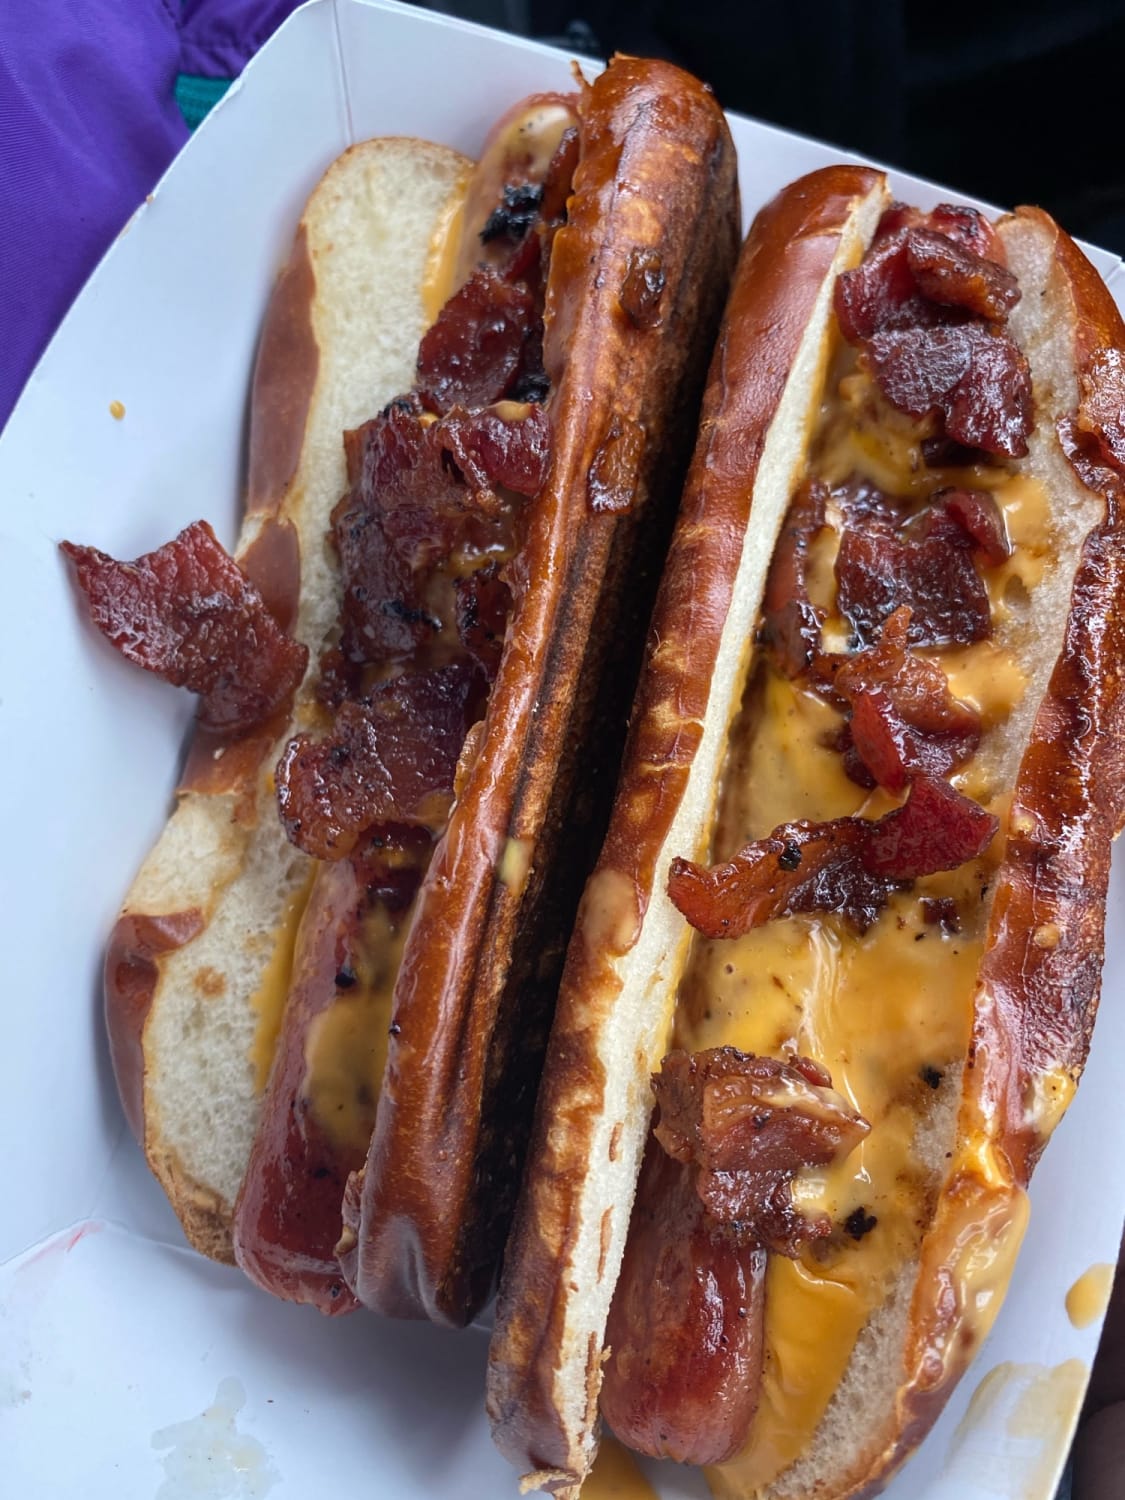 Beer cheese bacon hot dogs on stout rolls. Crushed them rather quickly.